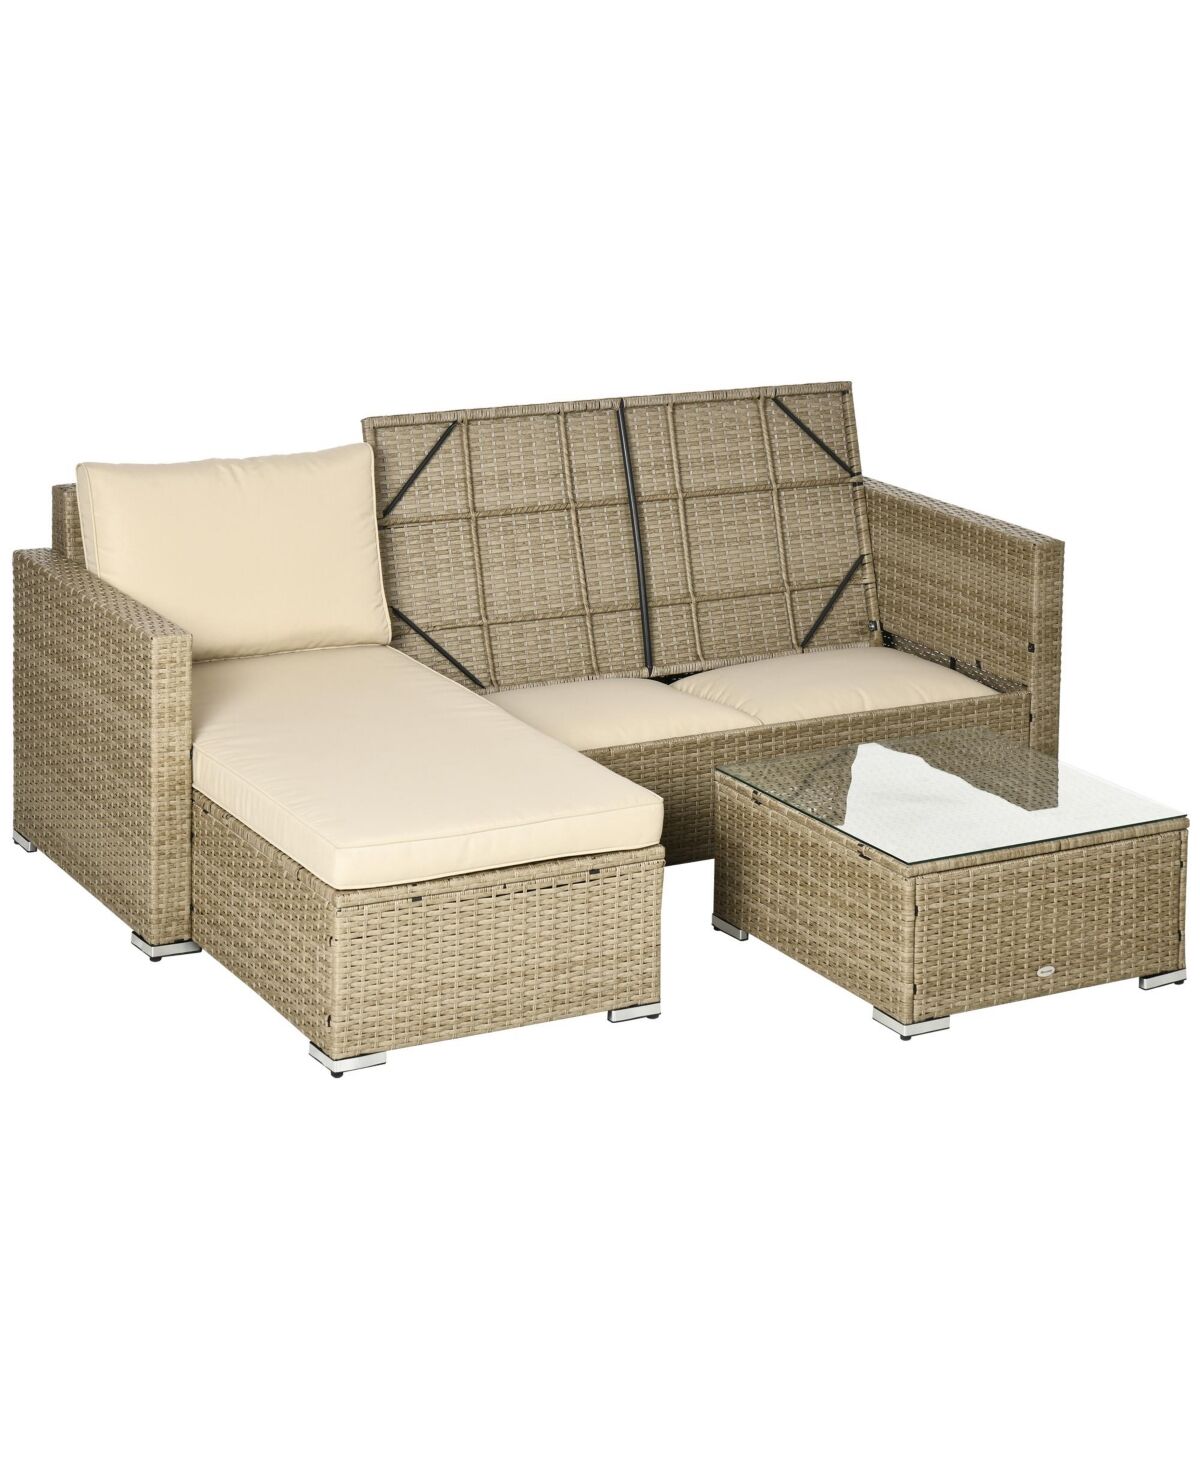 Outsunny 3 Piece Patio Wicker Furniture Set, Rattan Outdoor Sofa Set with Chaise Lounge & Loveseat, Soft Cushions, Storage, Tempered Glass Table, L-Sh